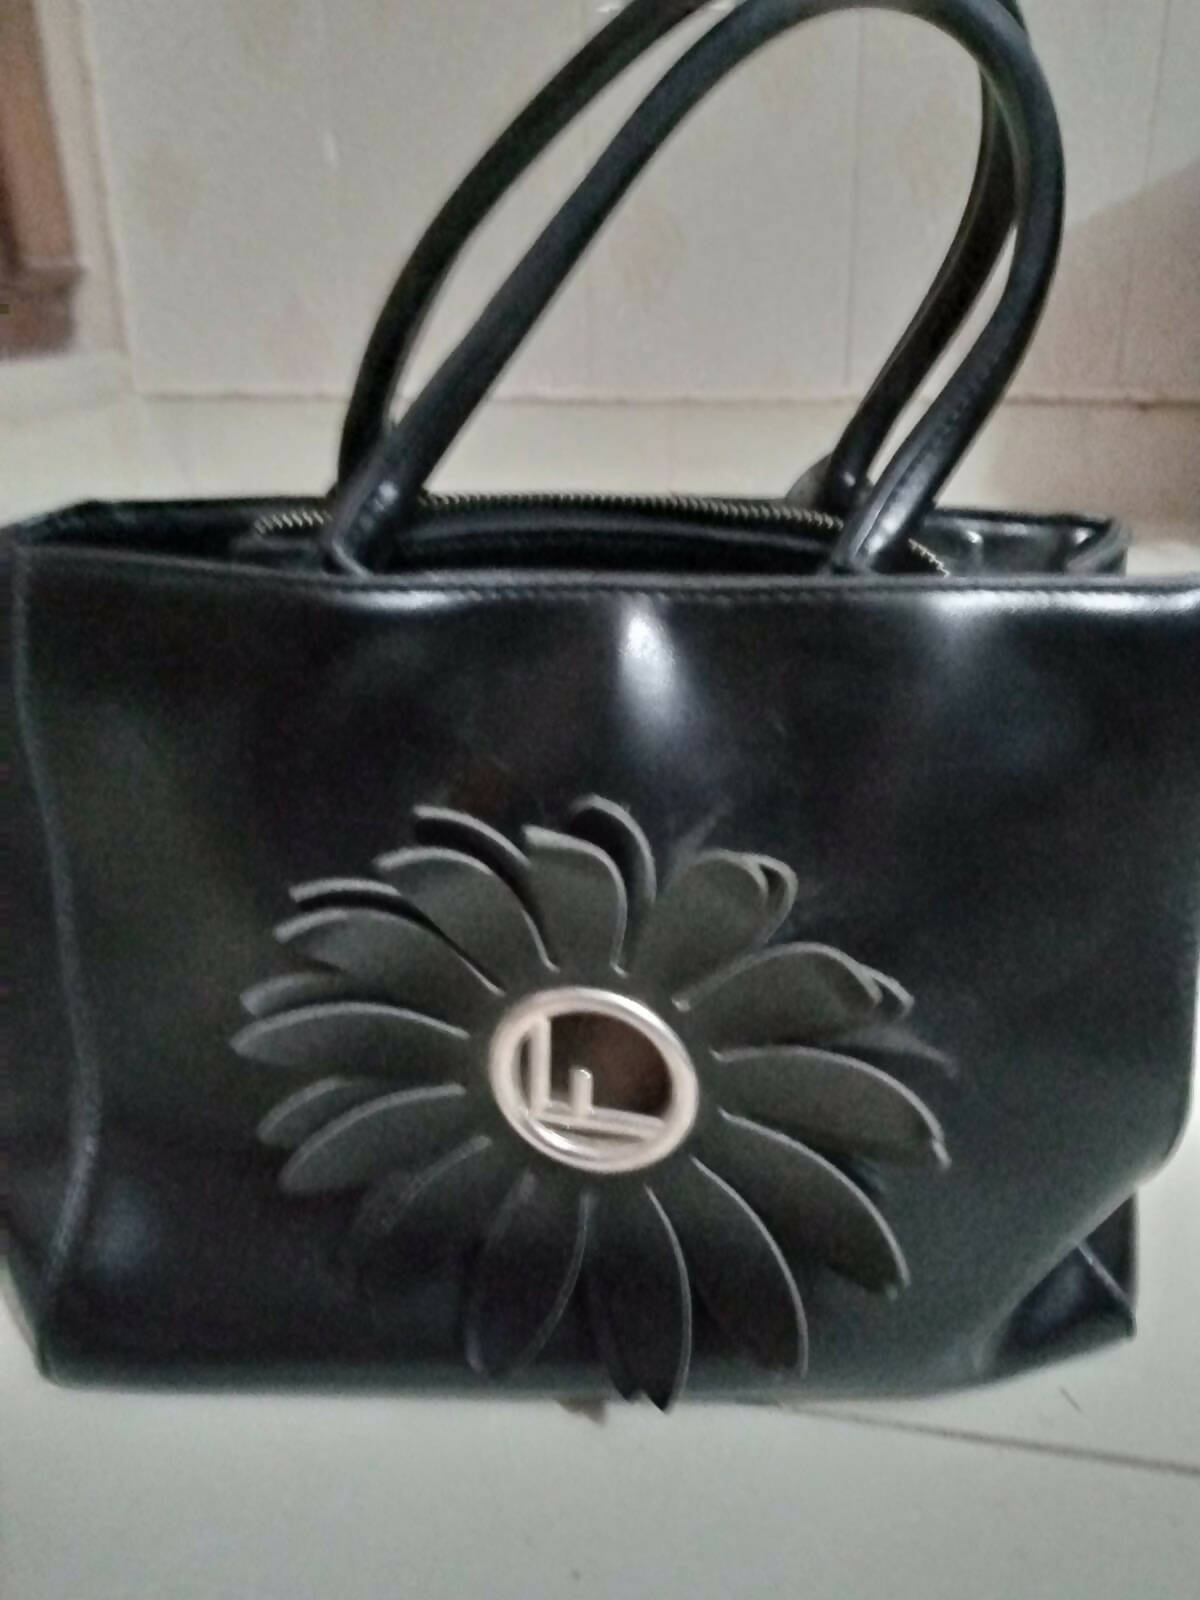 Black Leather Hand Bag | Women Bags | Worn Once